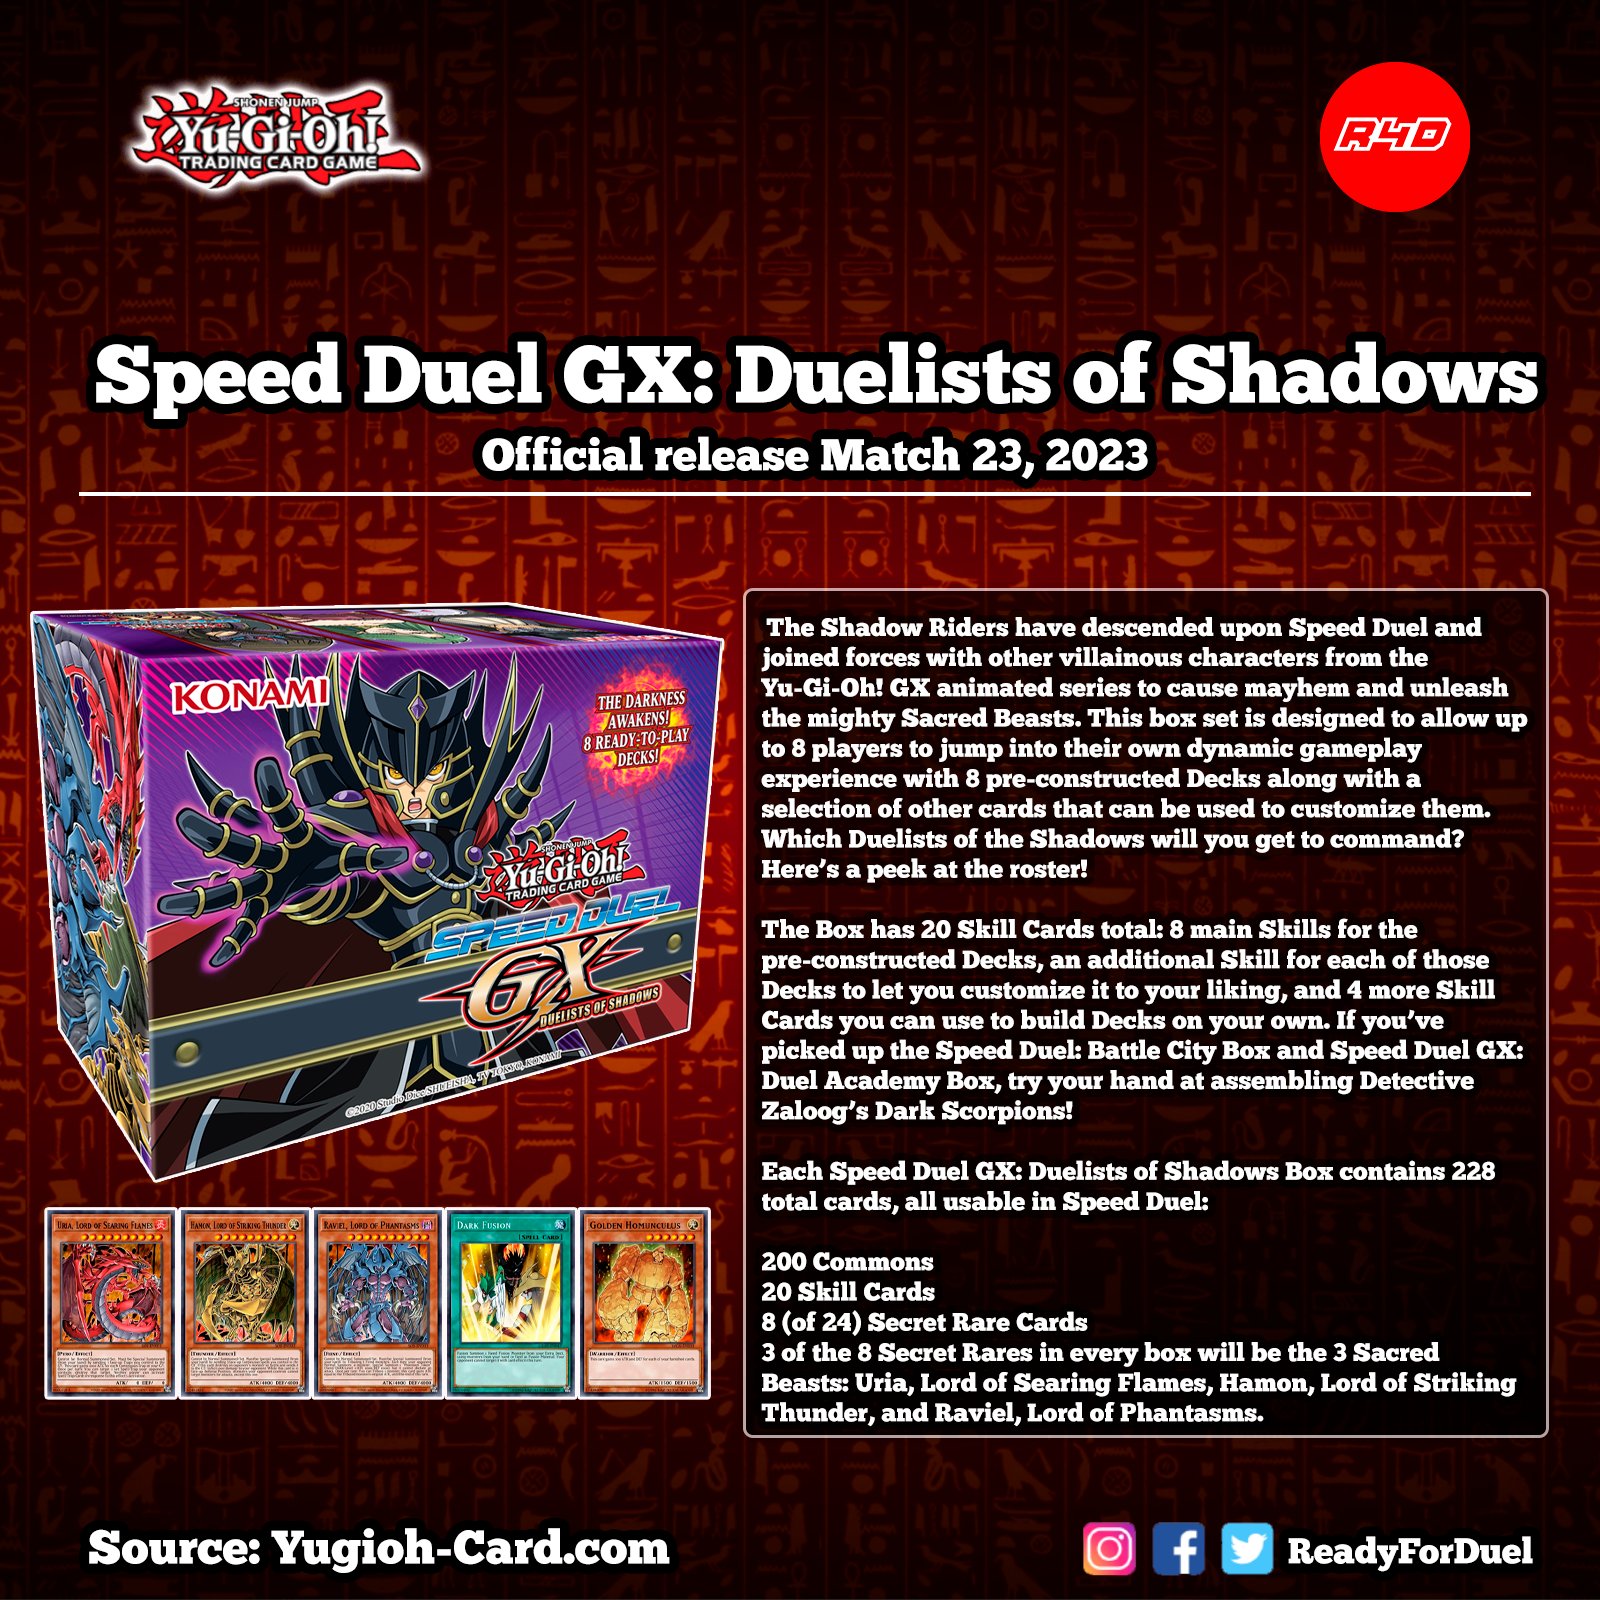 Yugioh Speed Duel GX: Duelists of Shadows Box